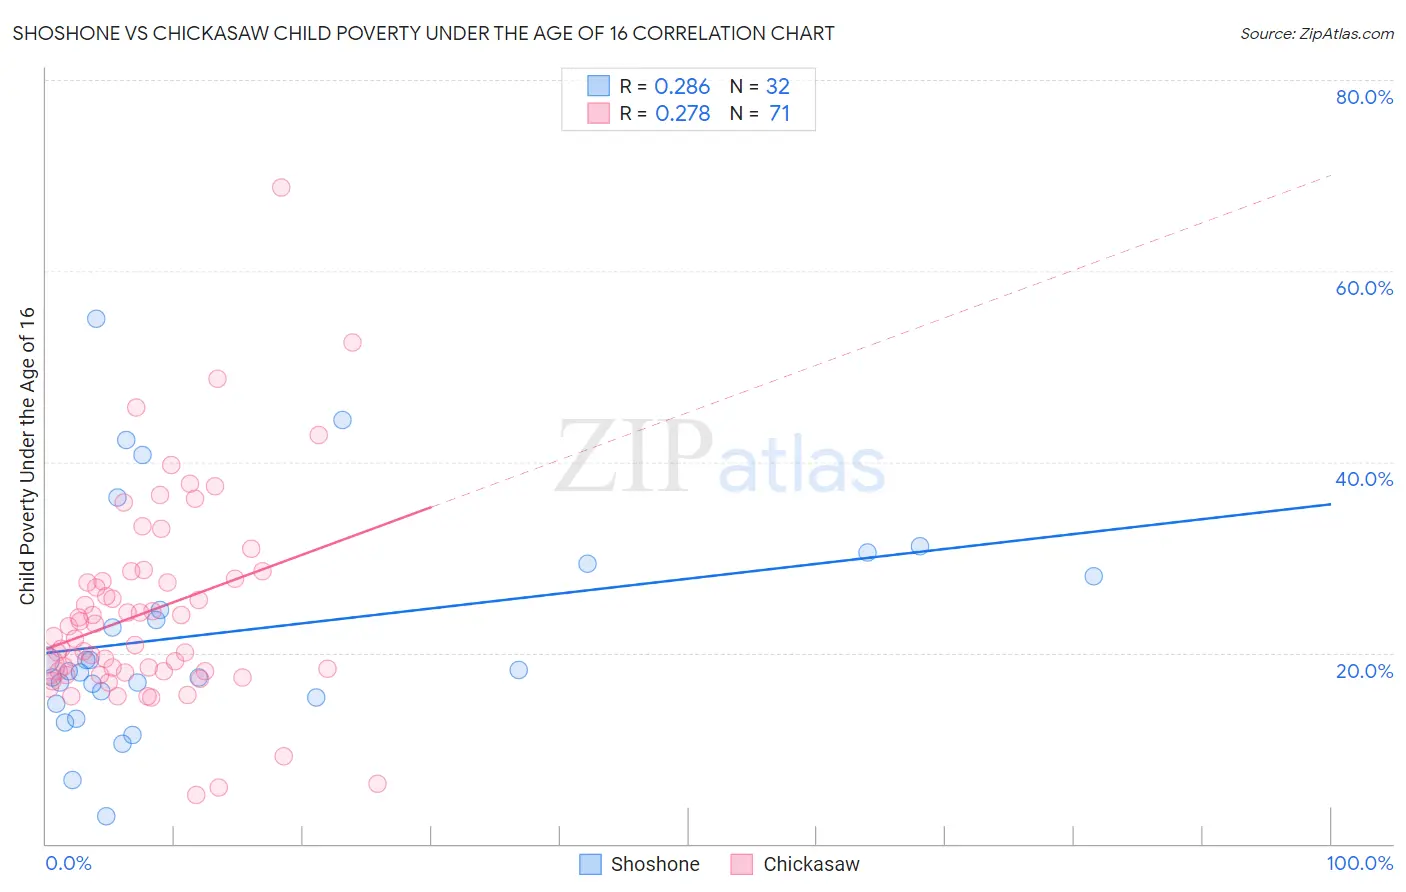 Shoshone vs Chickasaw Child Poverty Under the Age of 16